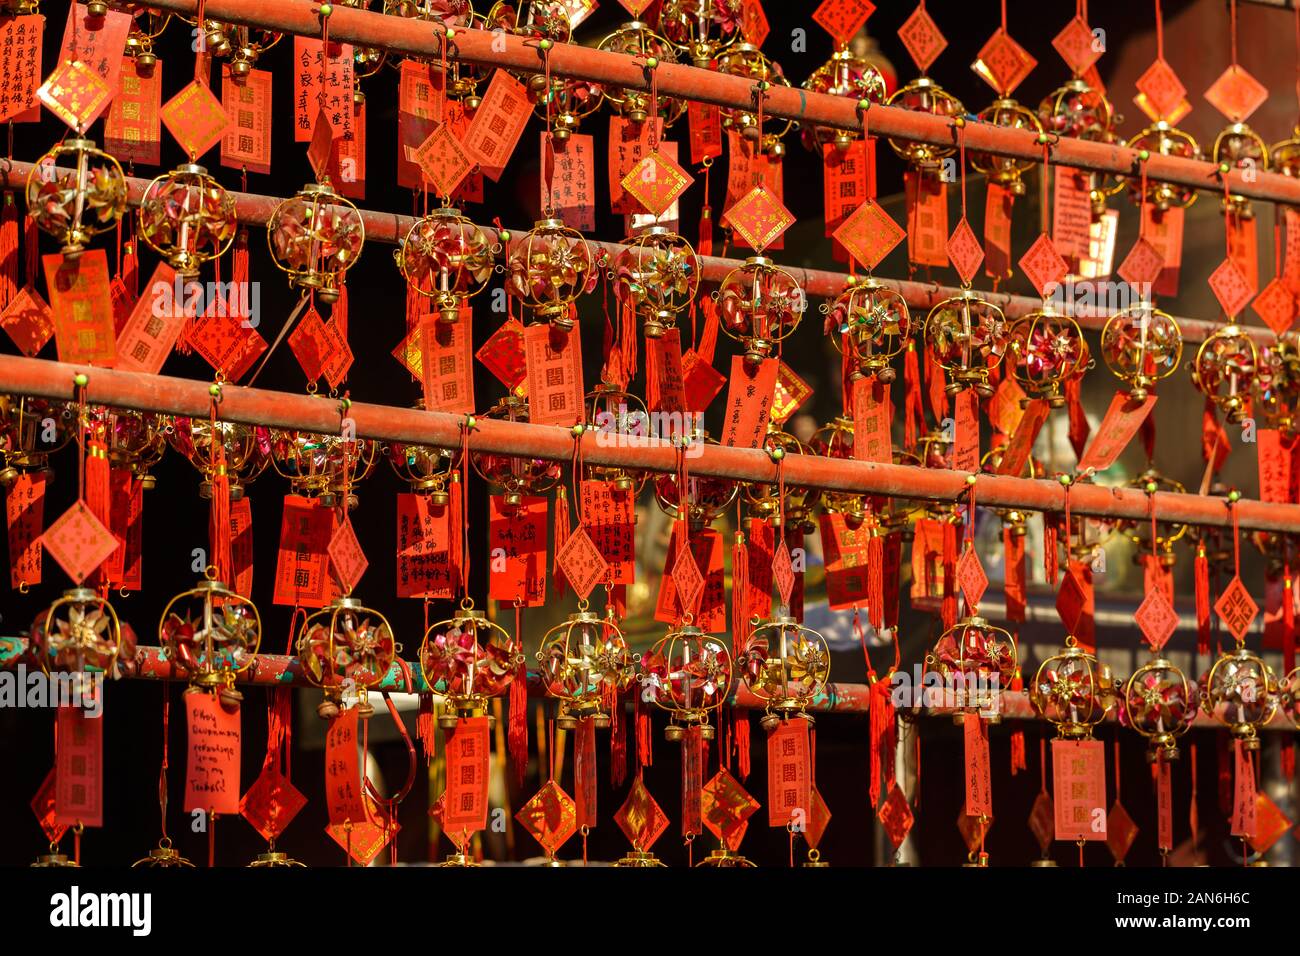 Red colored prayer cards at A-Ma temple. All lined up in rows and hanging on bars. The cards are artistically decorated with bells. Stock Photo